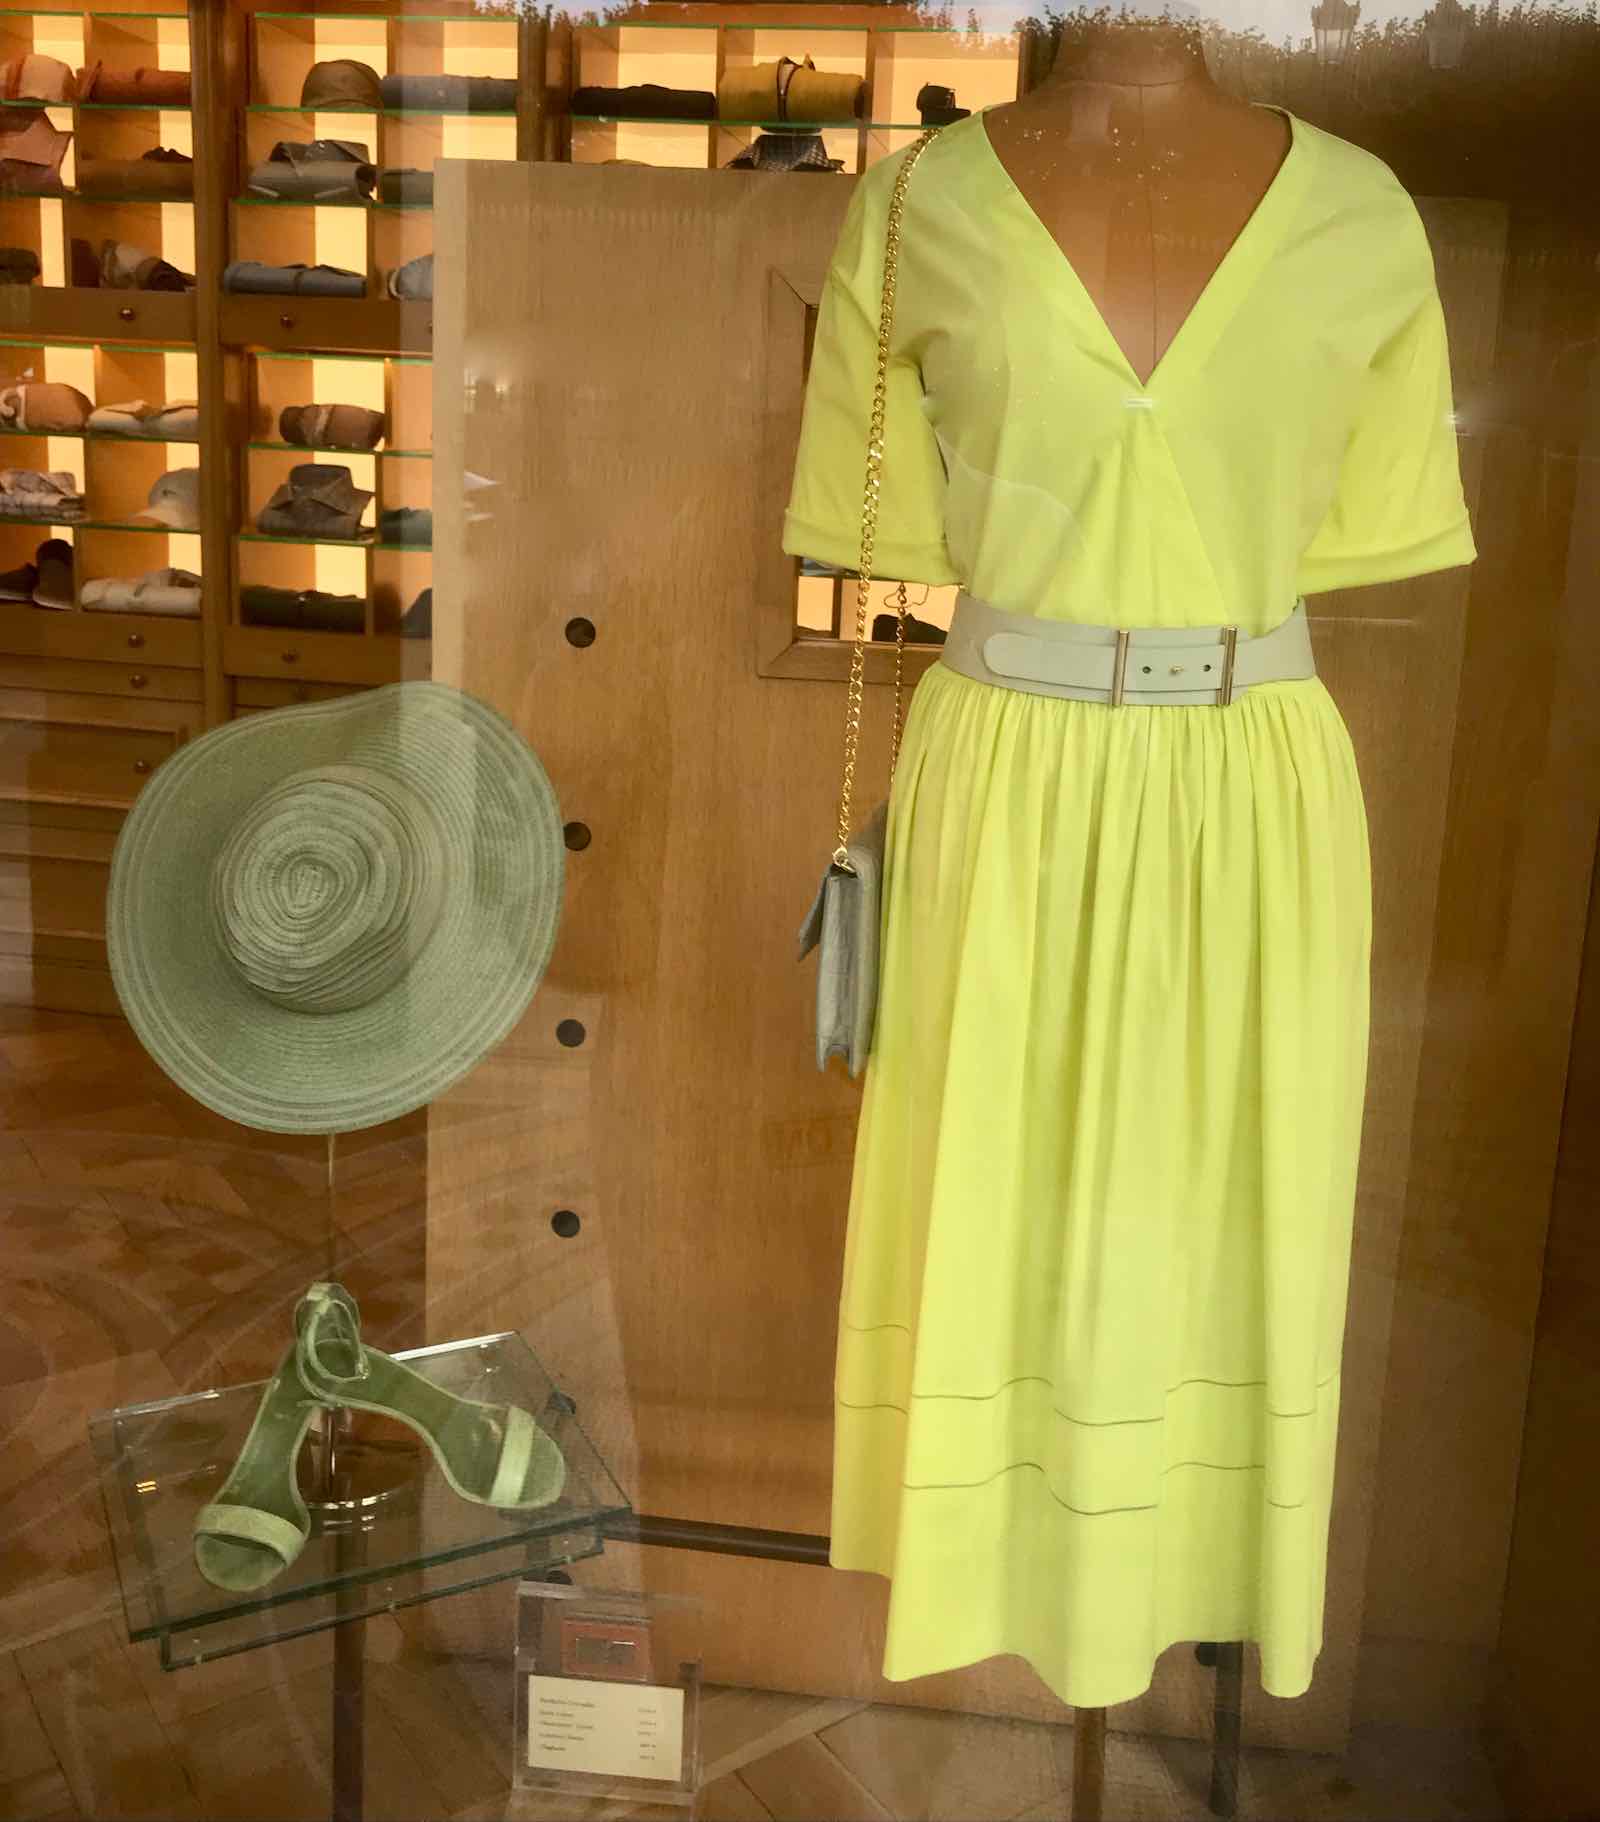 lemon yellow belted dress with handbag, hat and sandals in neutral gray color